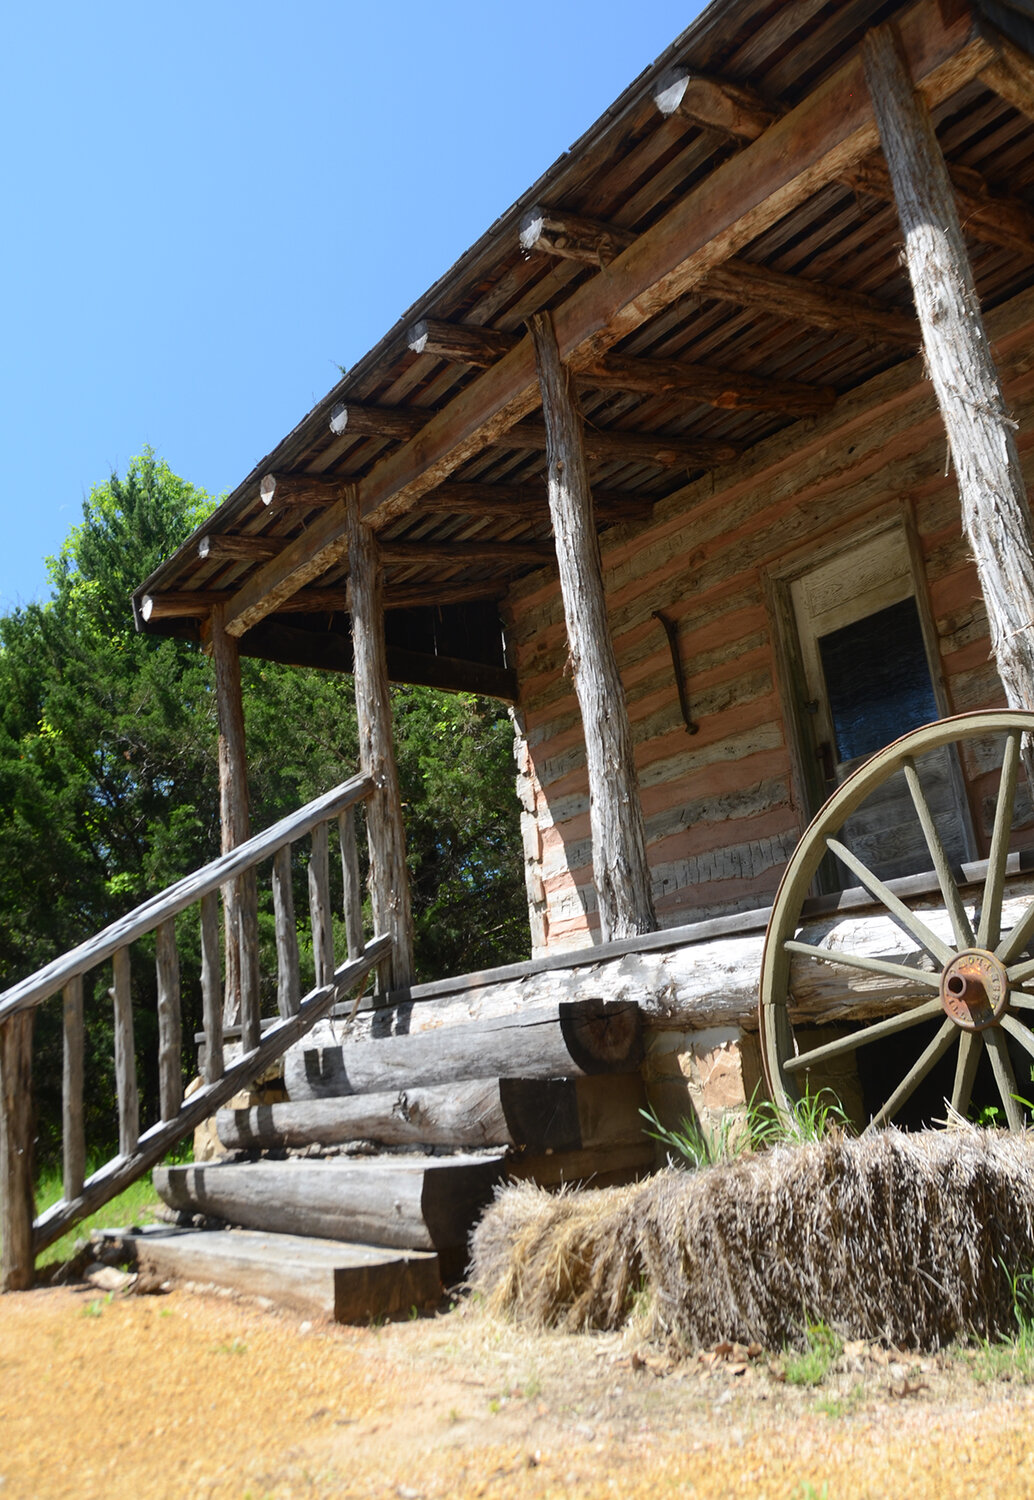 Visitors to the Log Cabin Park can explore historic structures such as this one at the Doss Heritage and Culture Center.